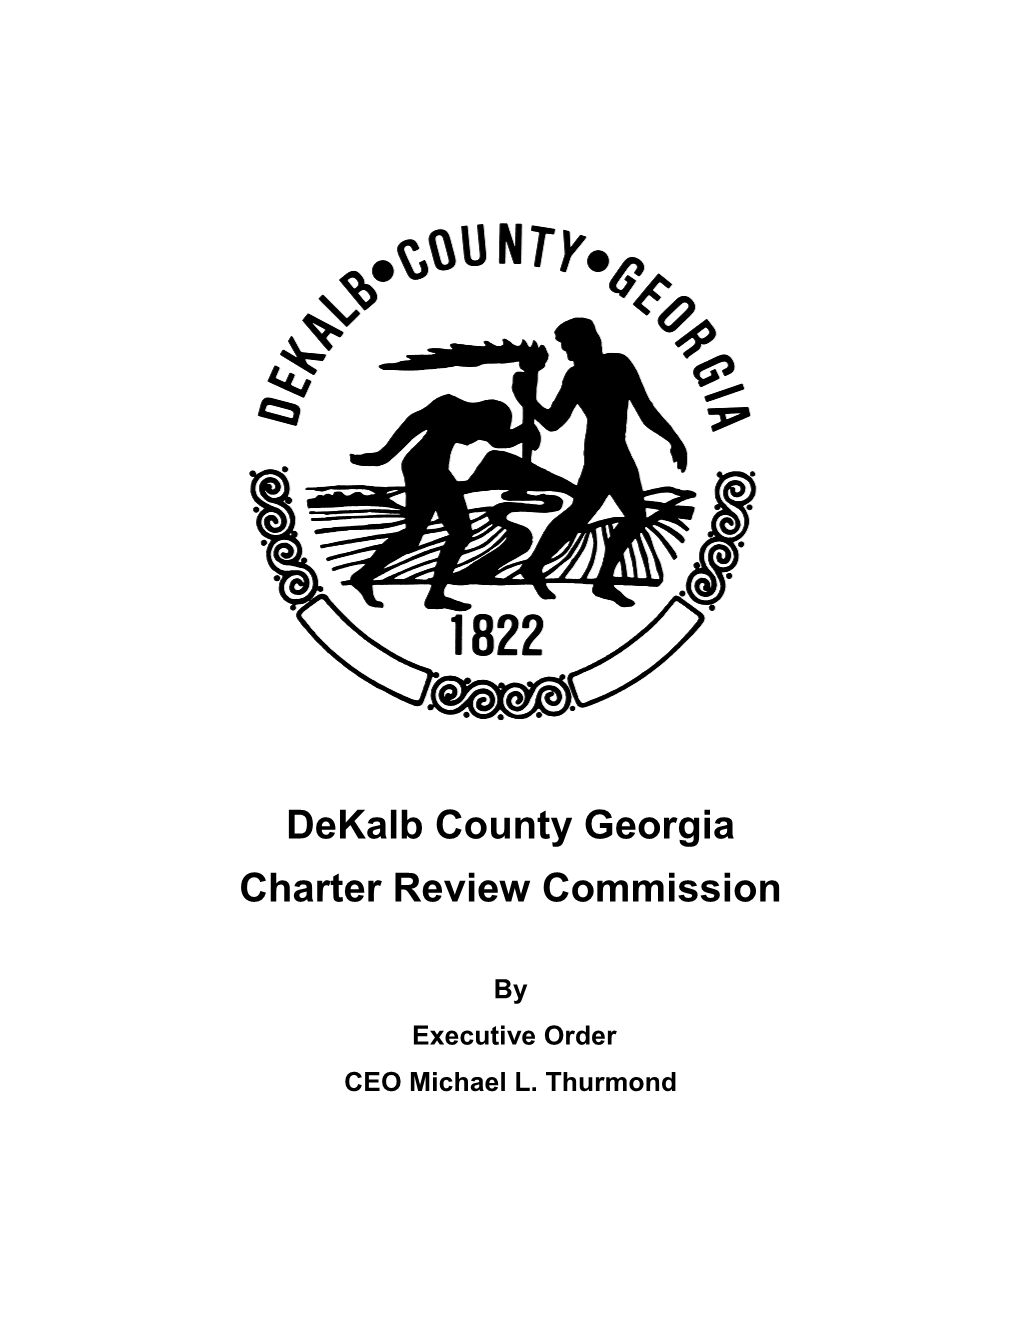 Dekalb County Georgia Charter Review Commission